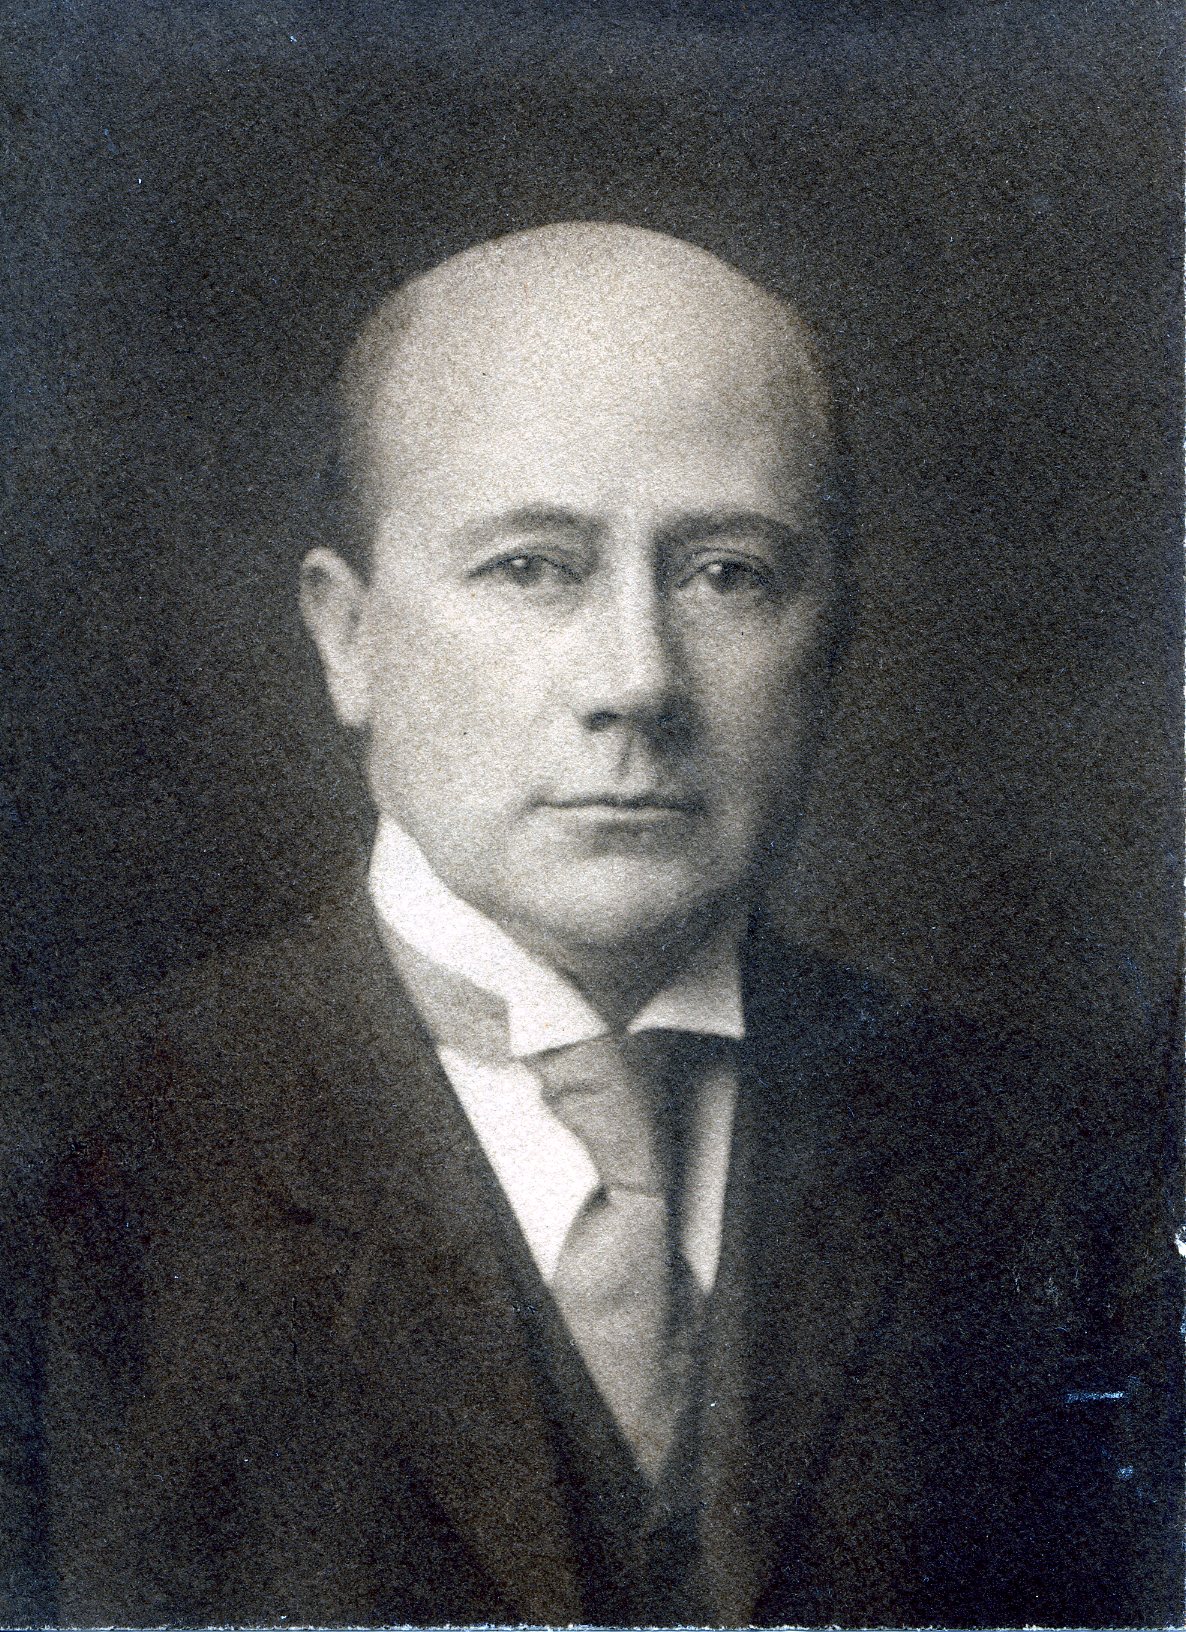 Member portrait of Charles H. Townsend